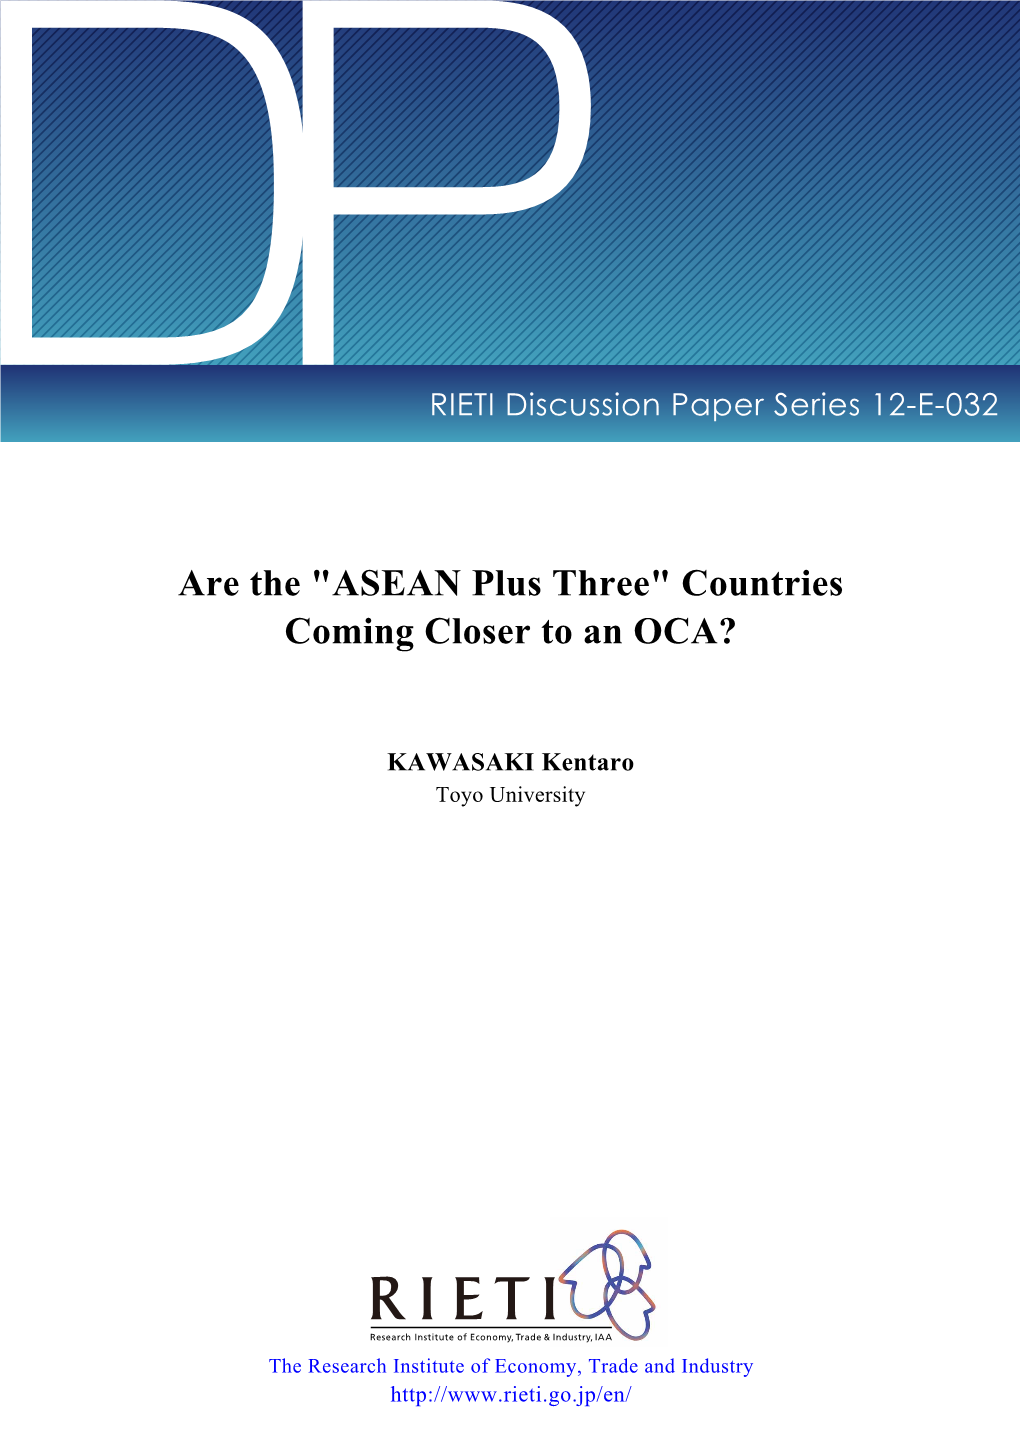 Are the “ASEAN Plus Three” Countries Coming Closer to an OCA?